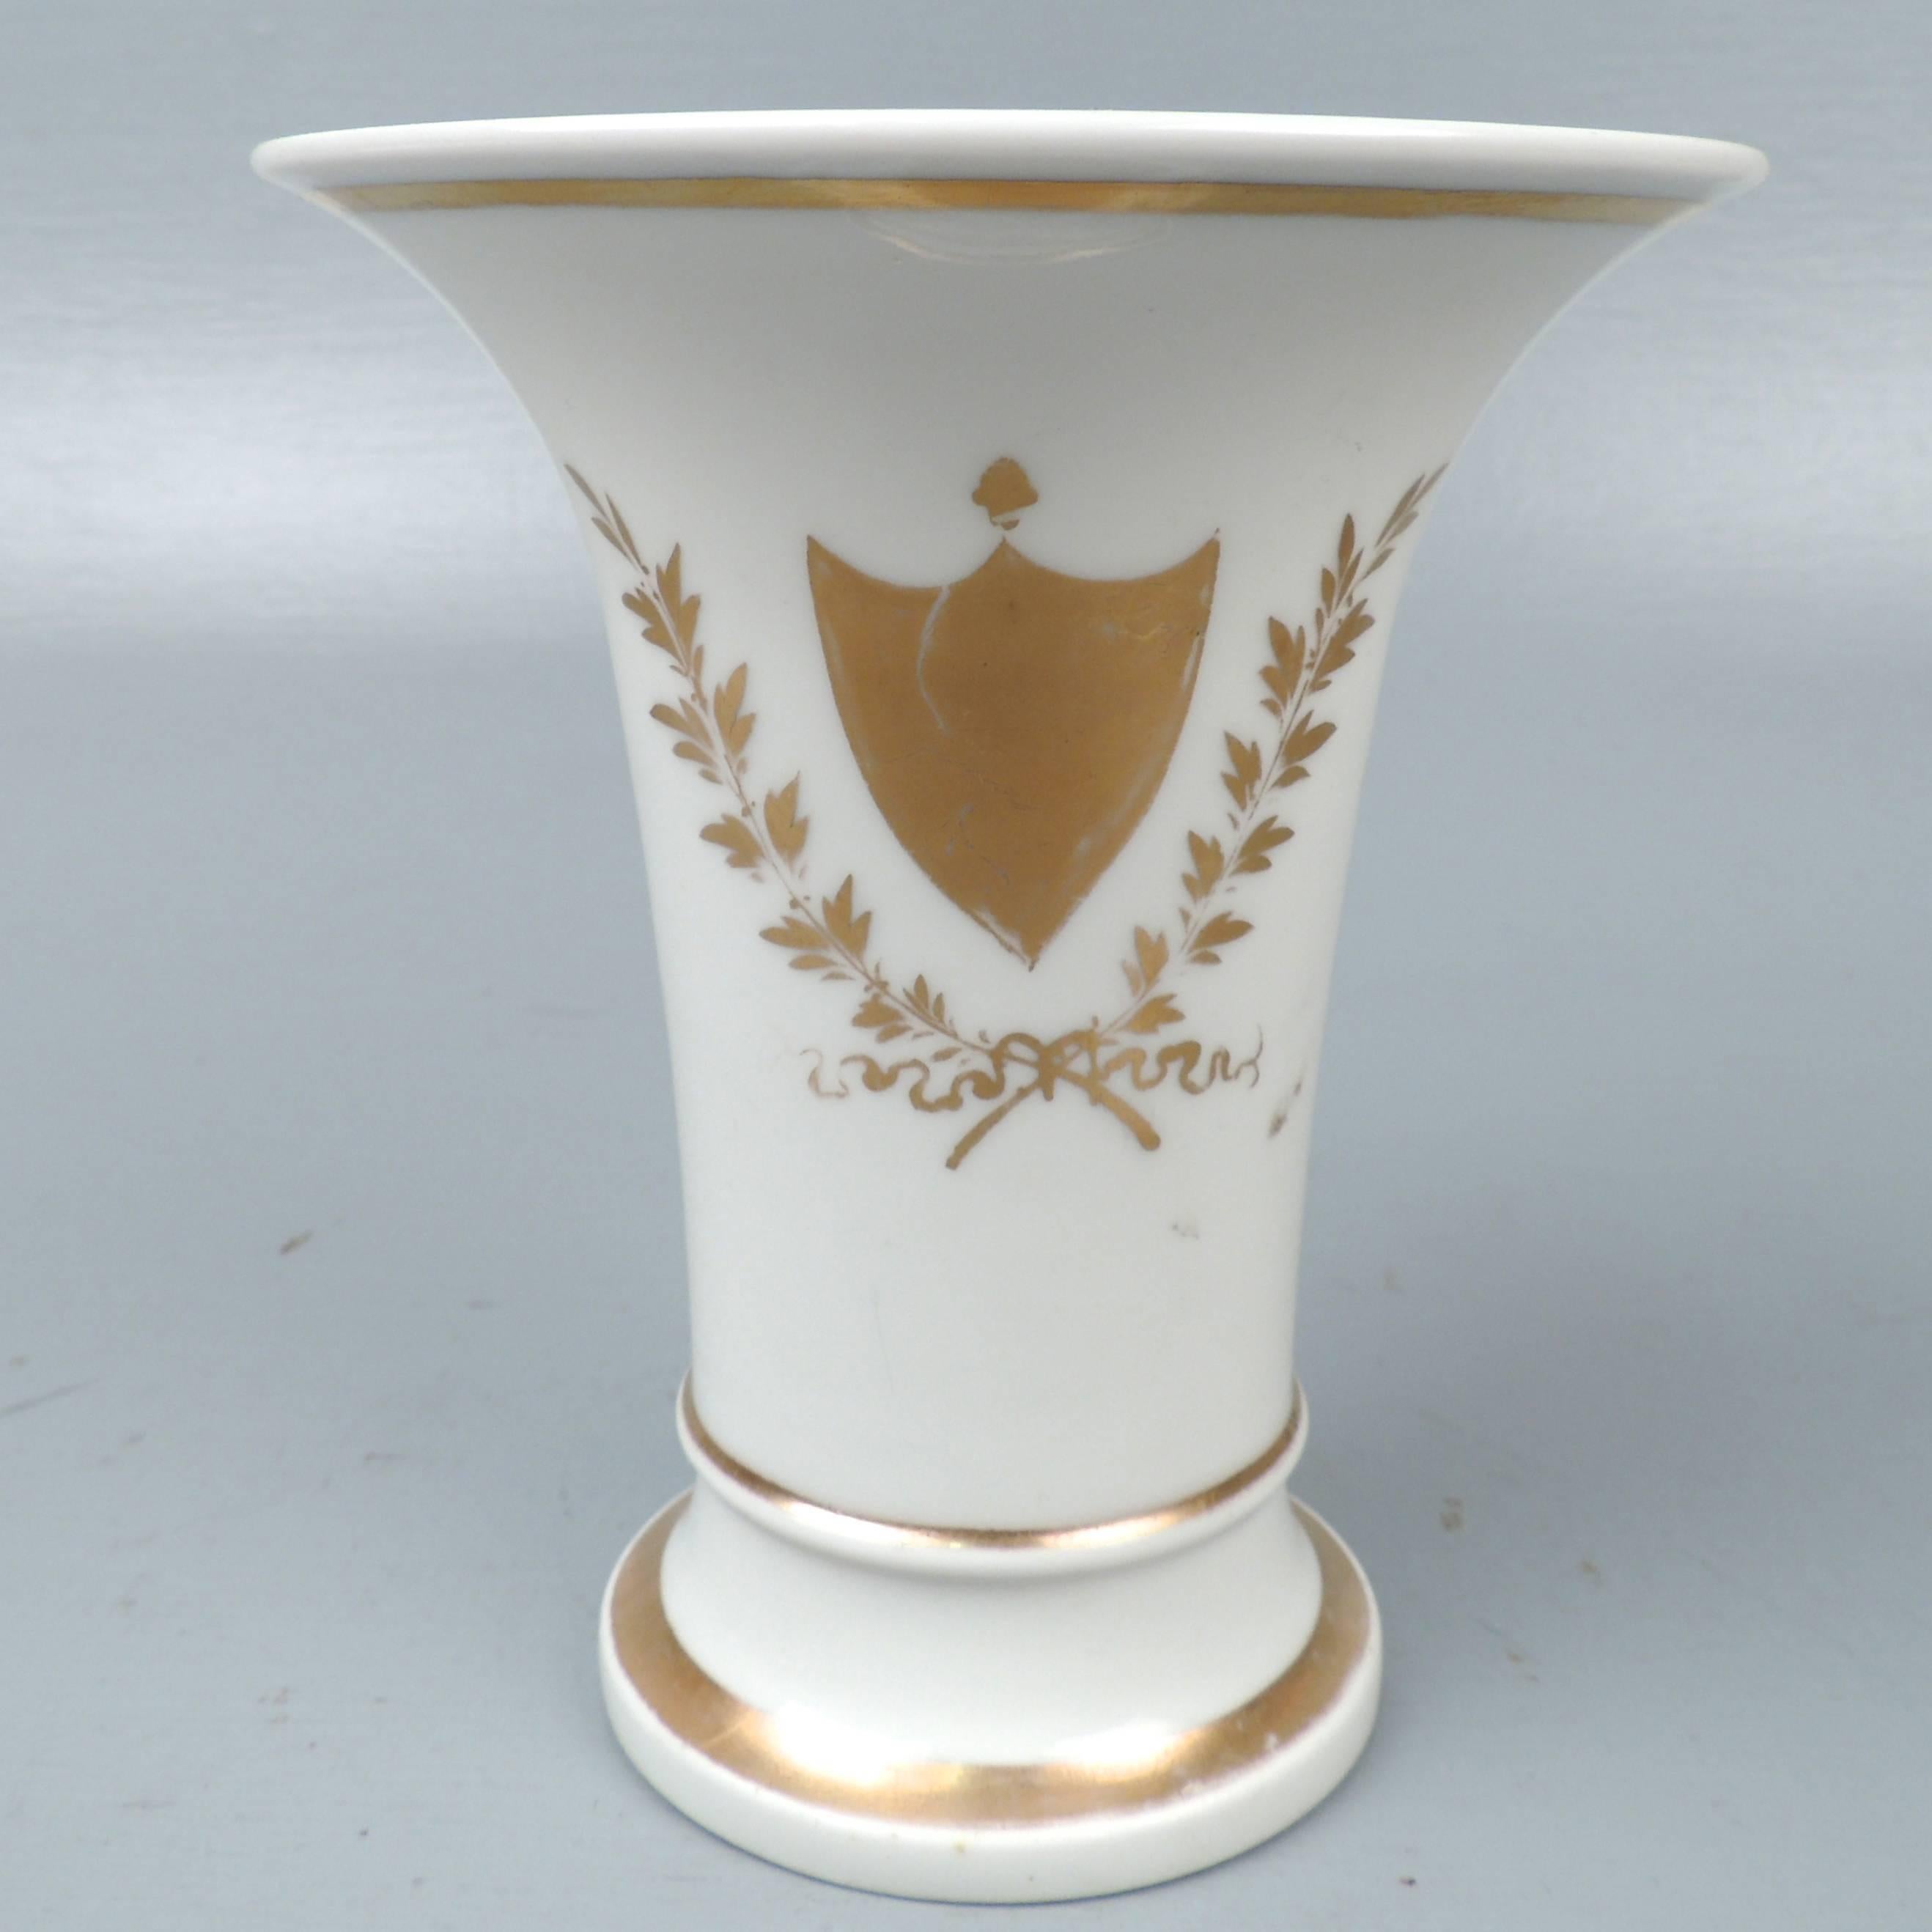 A fine and rare early 19th century Tucker and Hemphill porcelain vase.

The vase is decorated with a gilt shield device surrounded by leaf and branch and ribbon decoration. (Also, note how the shield is reminiscent of Tucker's famous perfumes!)